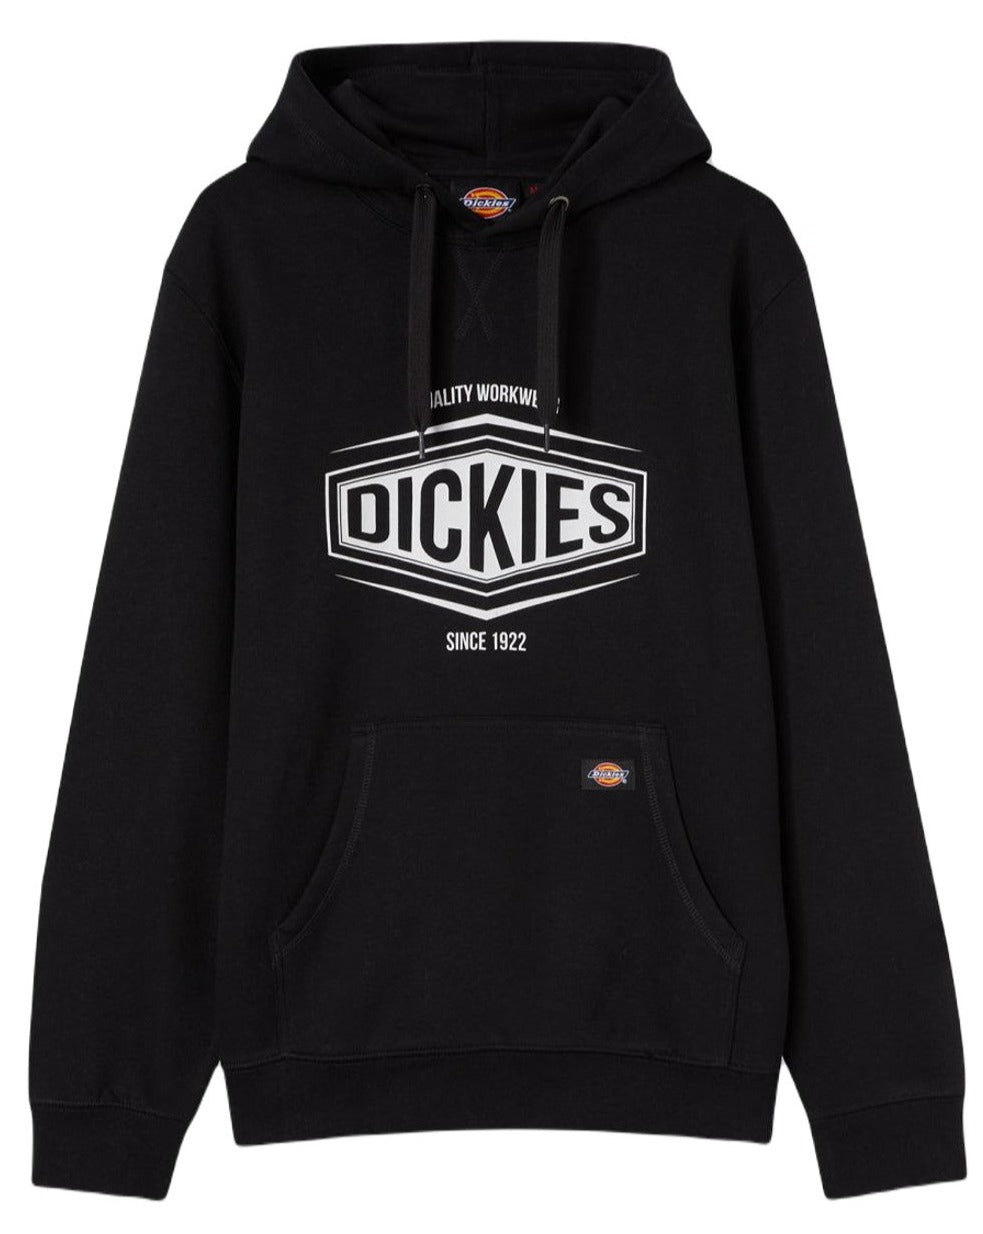 Dickies Workwear | The Go-To Brand for Reliable Clothing